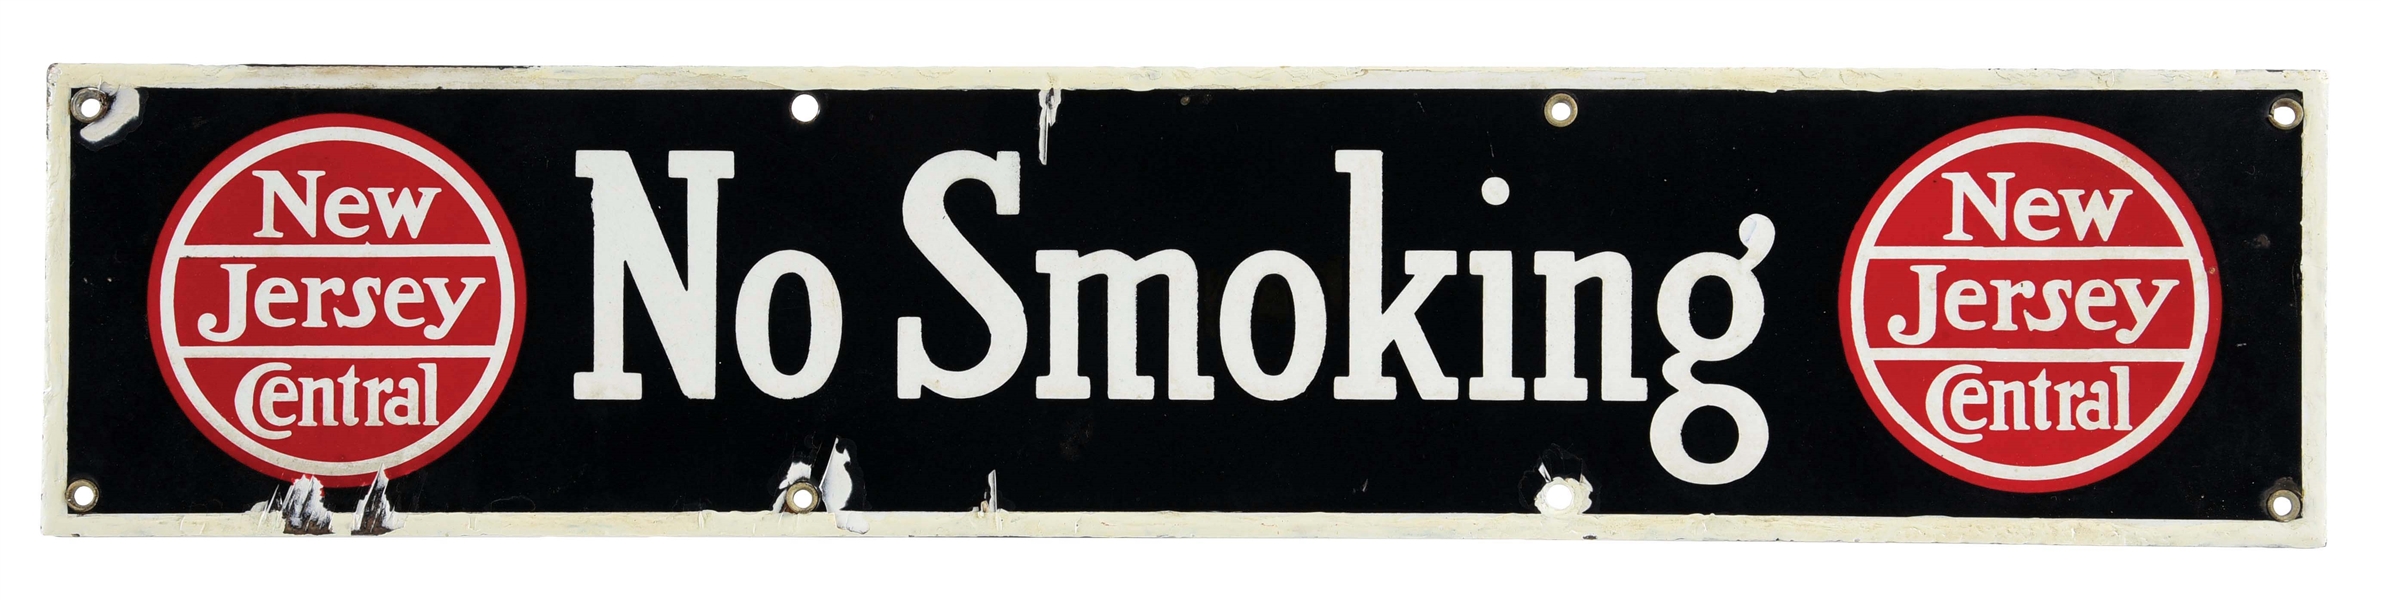 NEW JERSEY CENTRAL RAILROAD NO SMOKING PORCELAIN SIGN. 